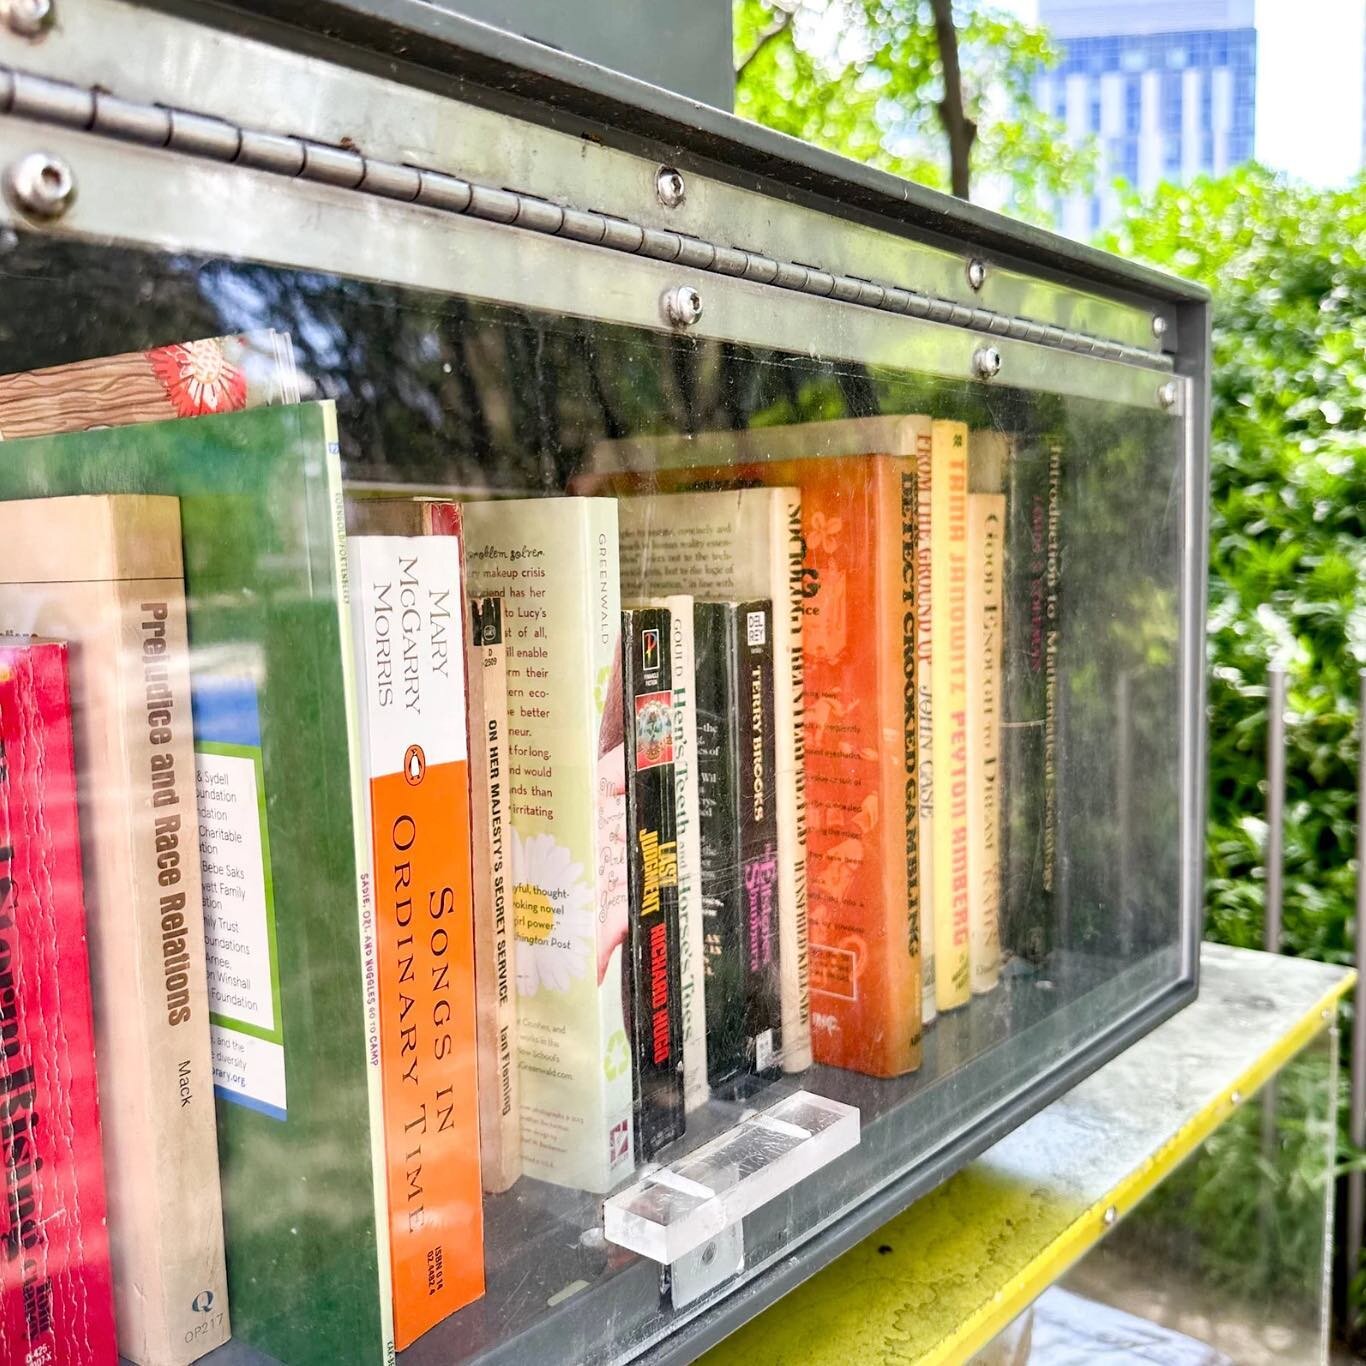 Looking for something new to read? Visit Kendall Square&rsquo;s little libraries! You never know what you&rsquo;ll find or what new literary adventure you&rsquo;ll find yourself on. Discover the joy of reading today! 📚✨⁠
⁠
⁠
#kendallsquare #freelibr